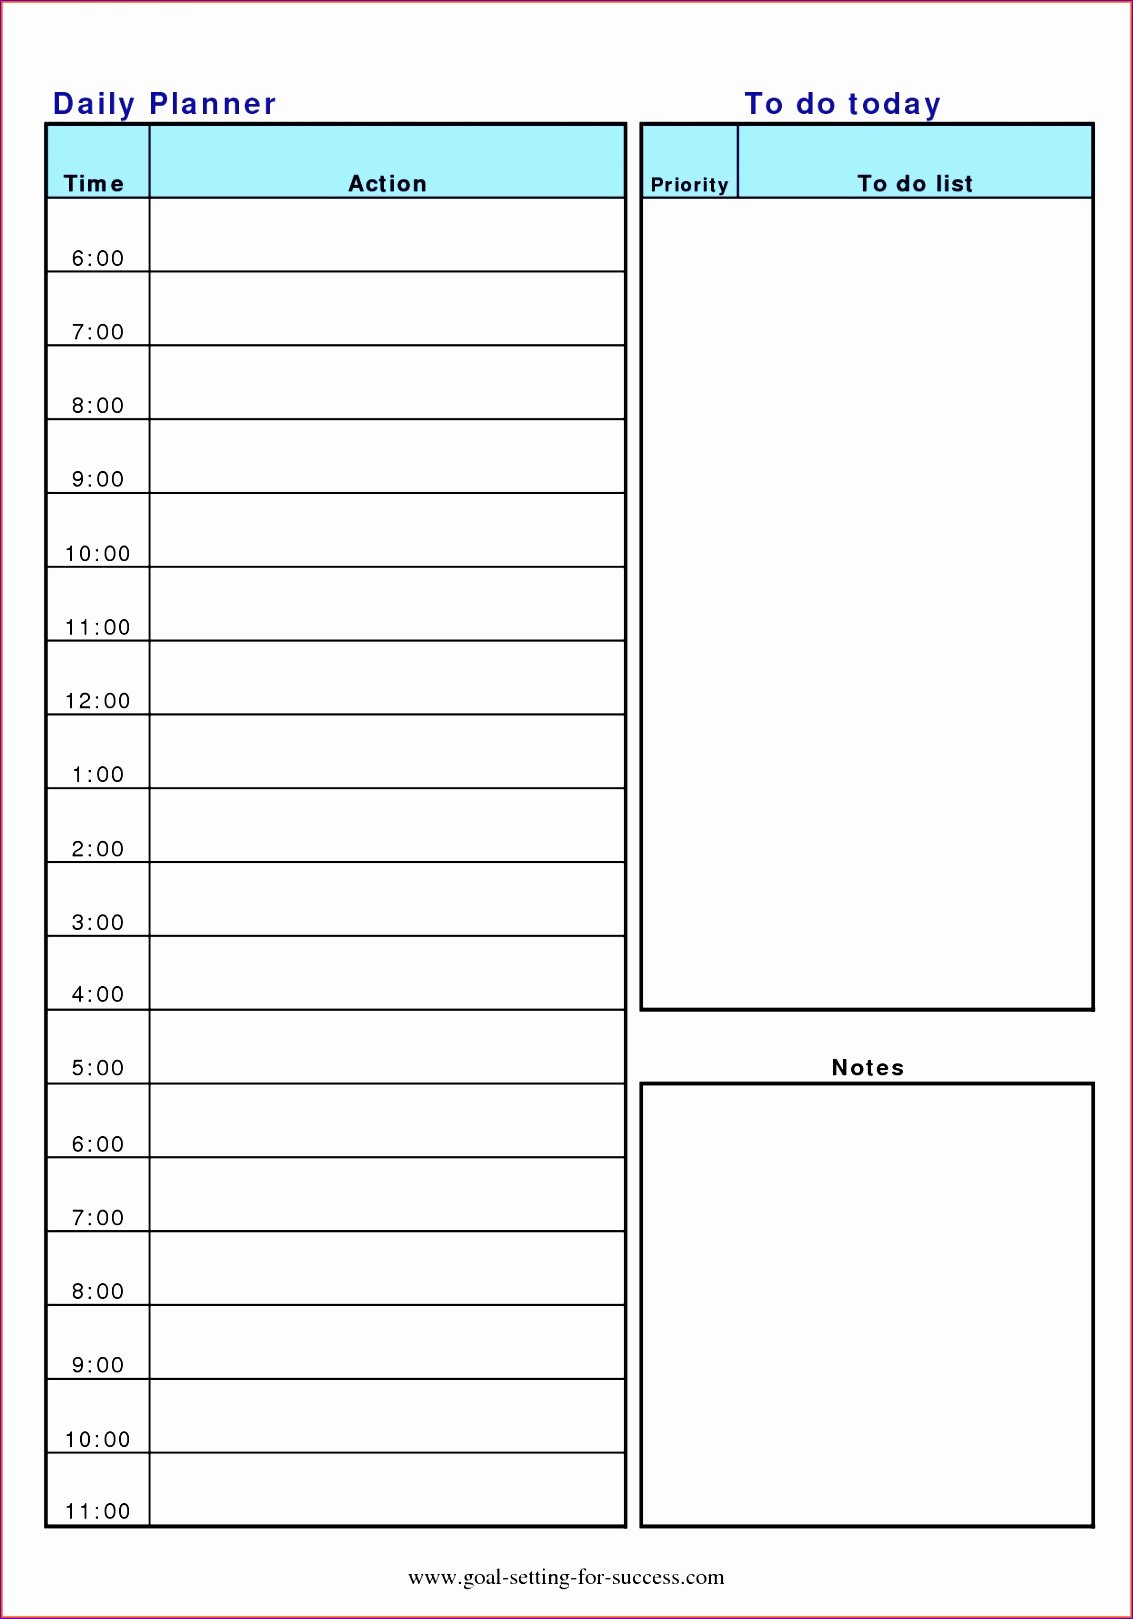 Daily Schedule Excel Template Luxury 8 Daily Planner Excel Template Exceltemplates